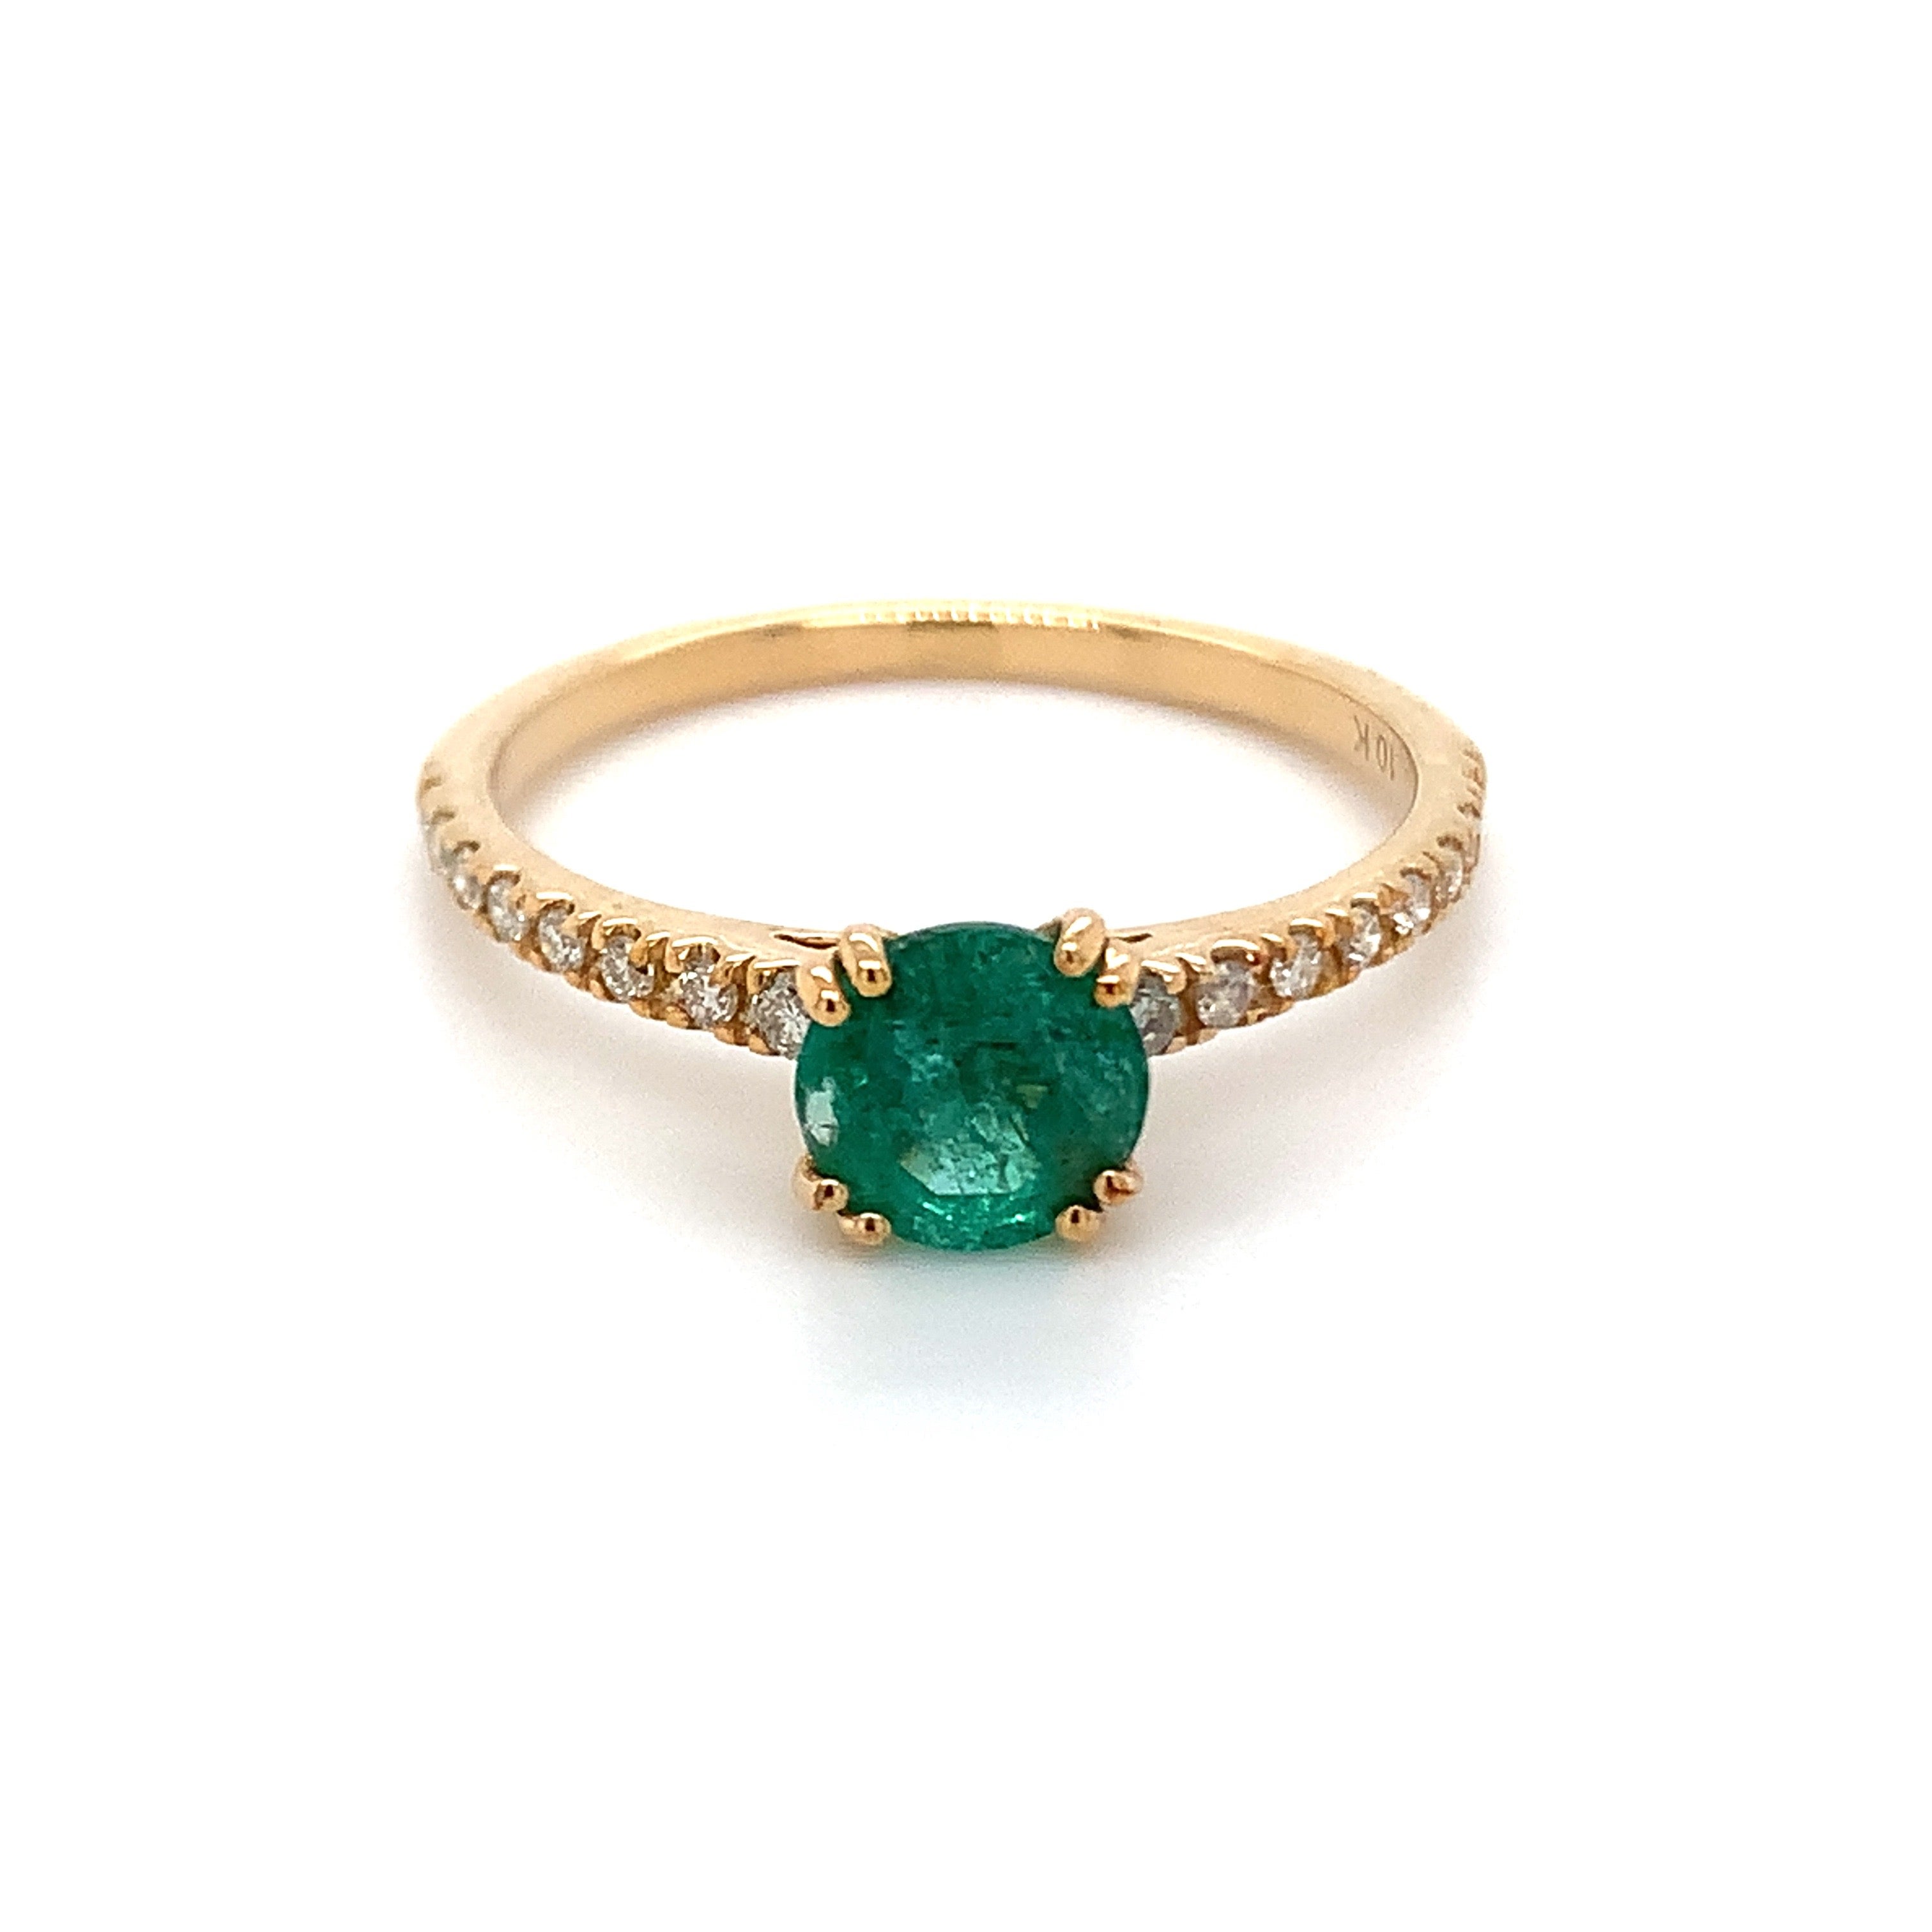 0.82 Carat Round Emerald Ring with Diamond in 10k Yellow Gold